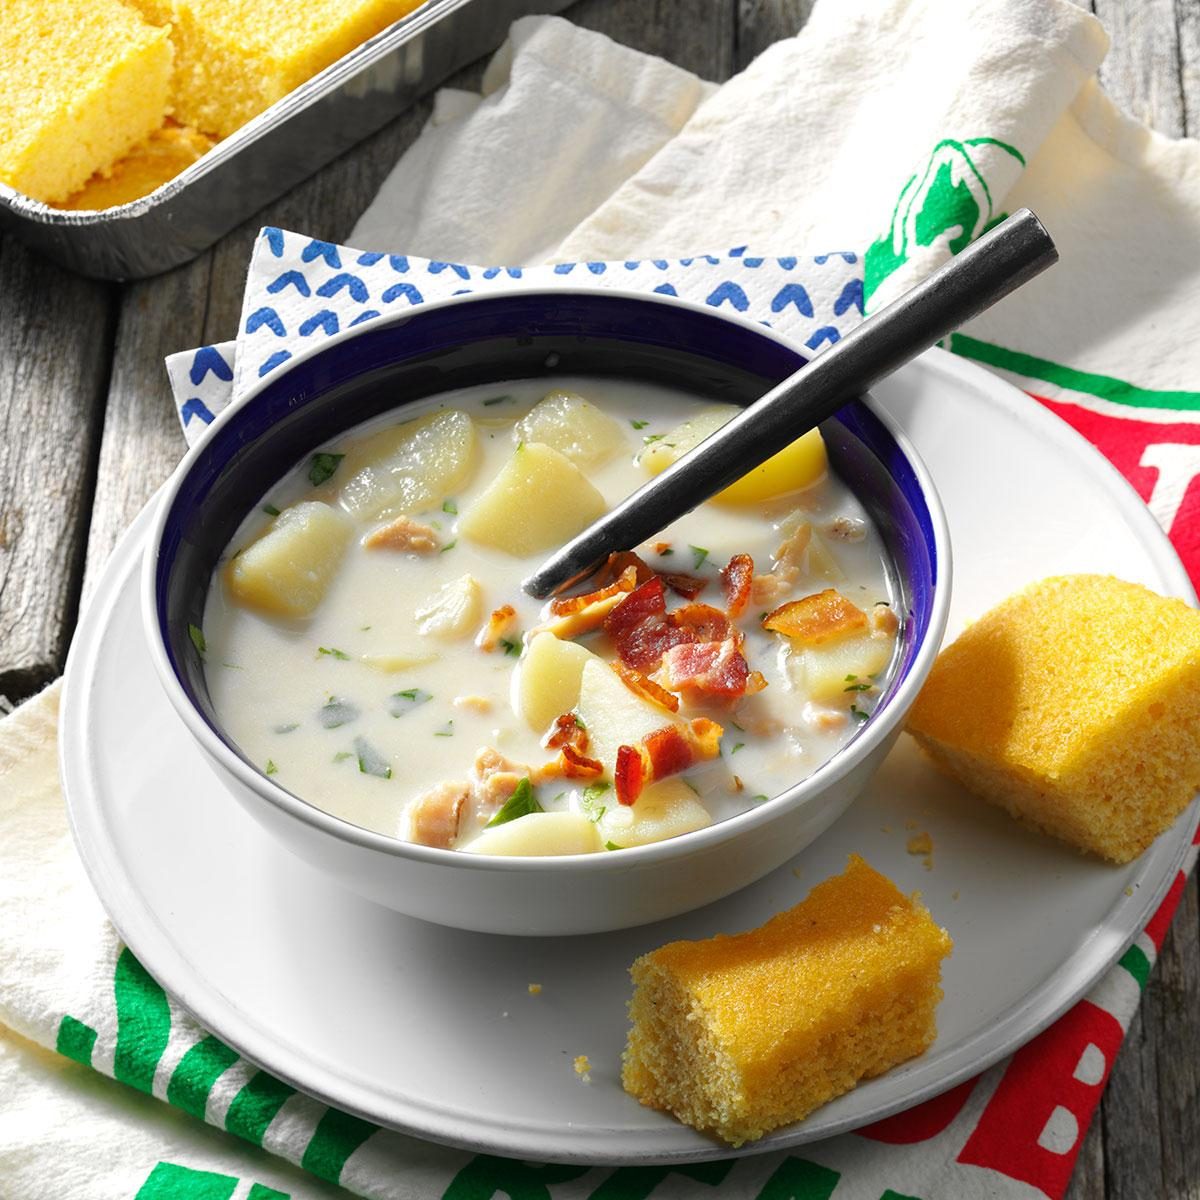 Inspired by: New England Clam Chowder